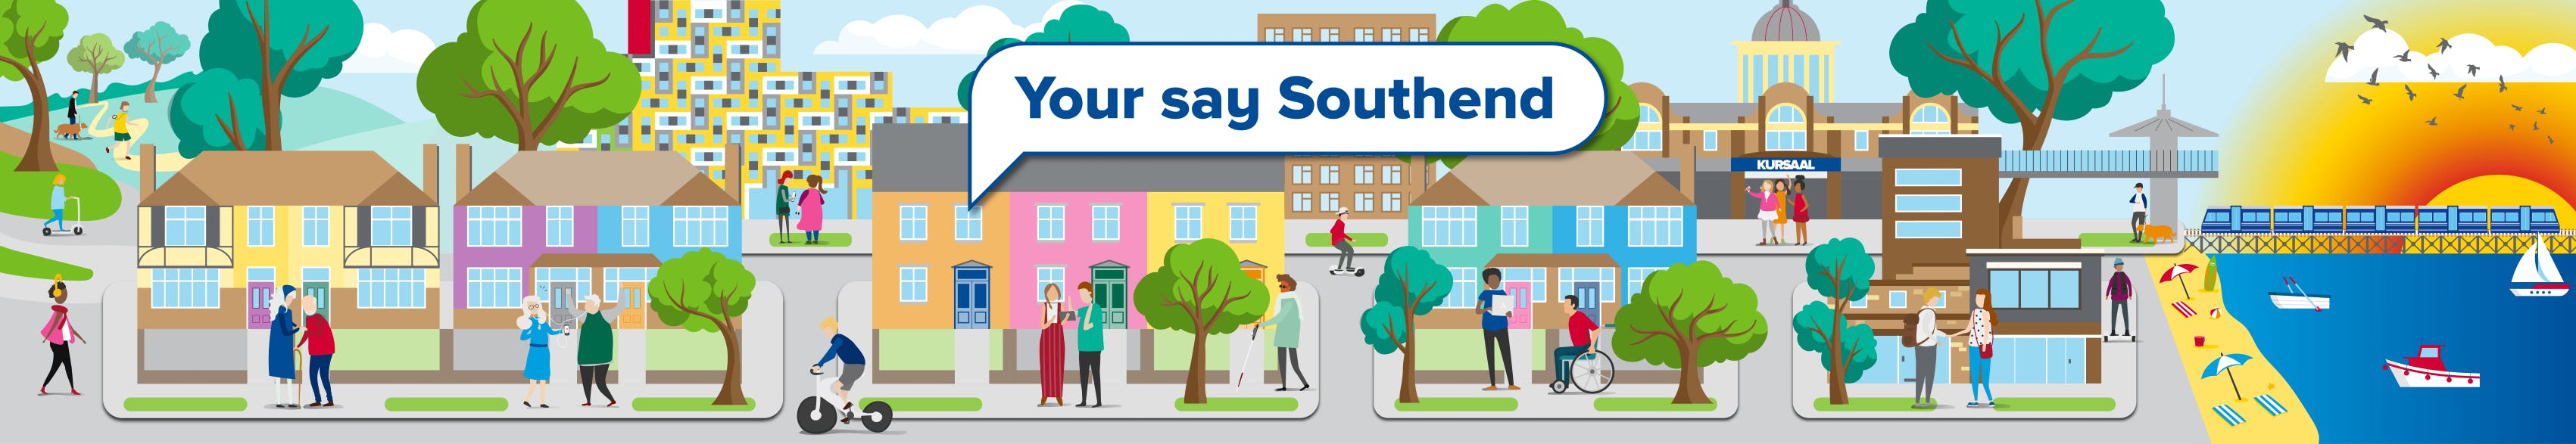 Your say Southend banner,cartoon graphic landscape on Southend with the Kursaal, pier, seaside and residents